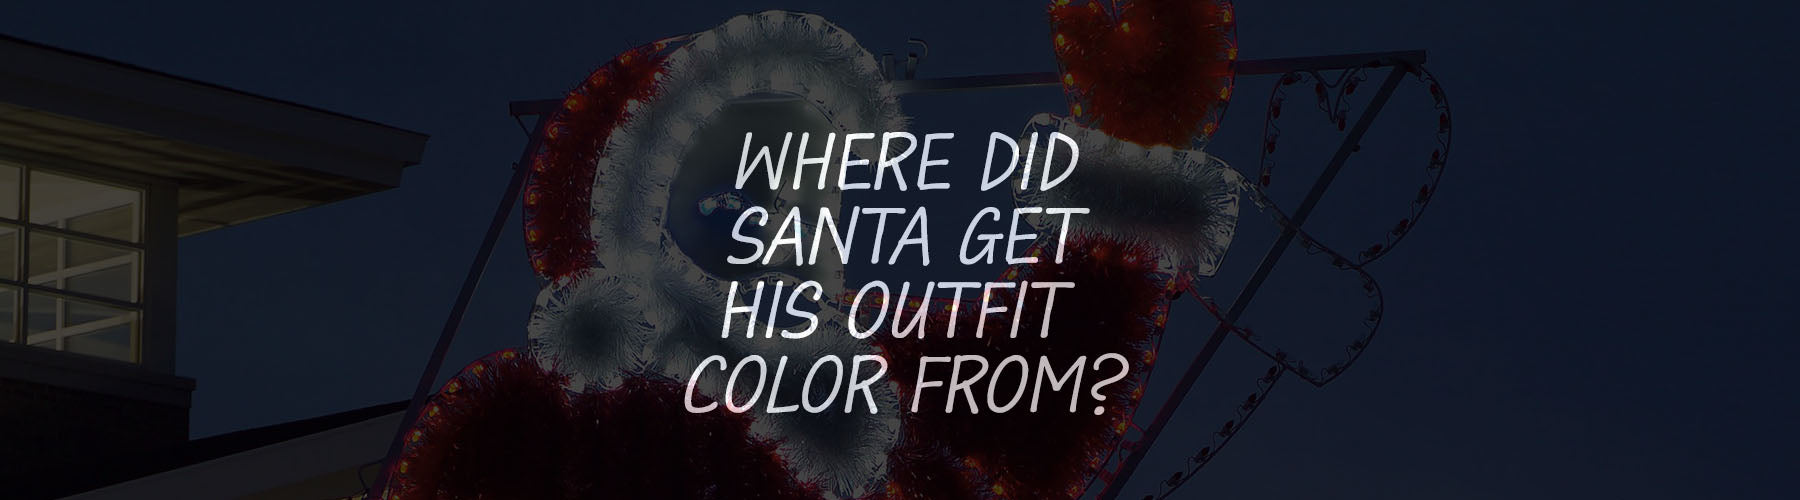 Where did Santa get his outfit color from?